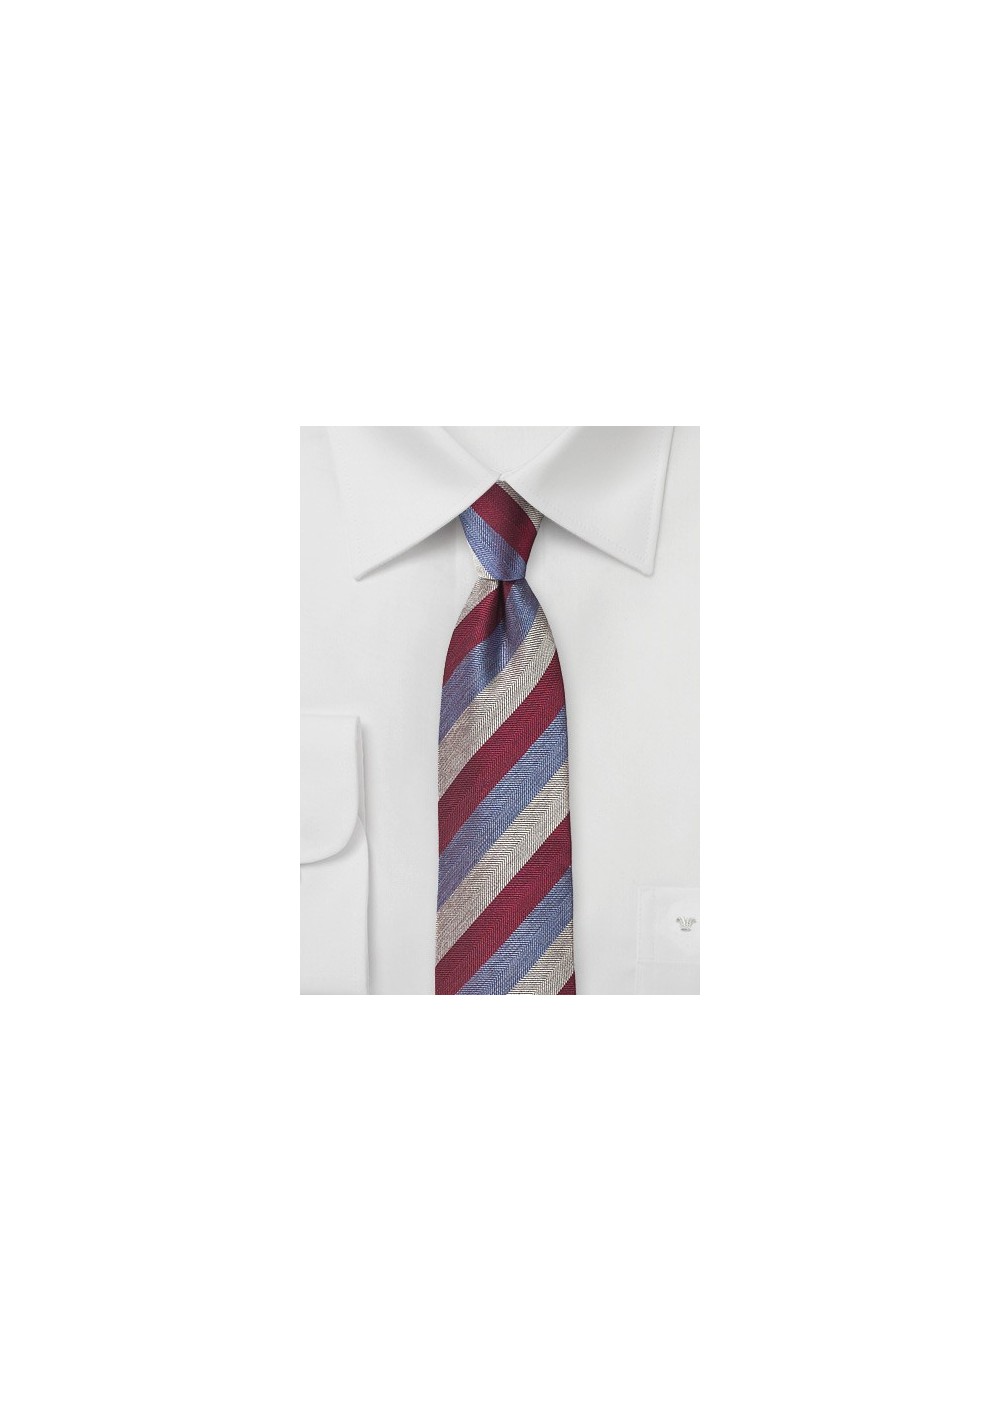 Striped Summer Tie in Burgundy and Violet